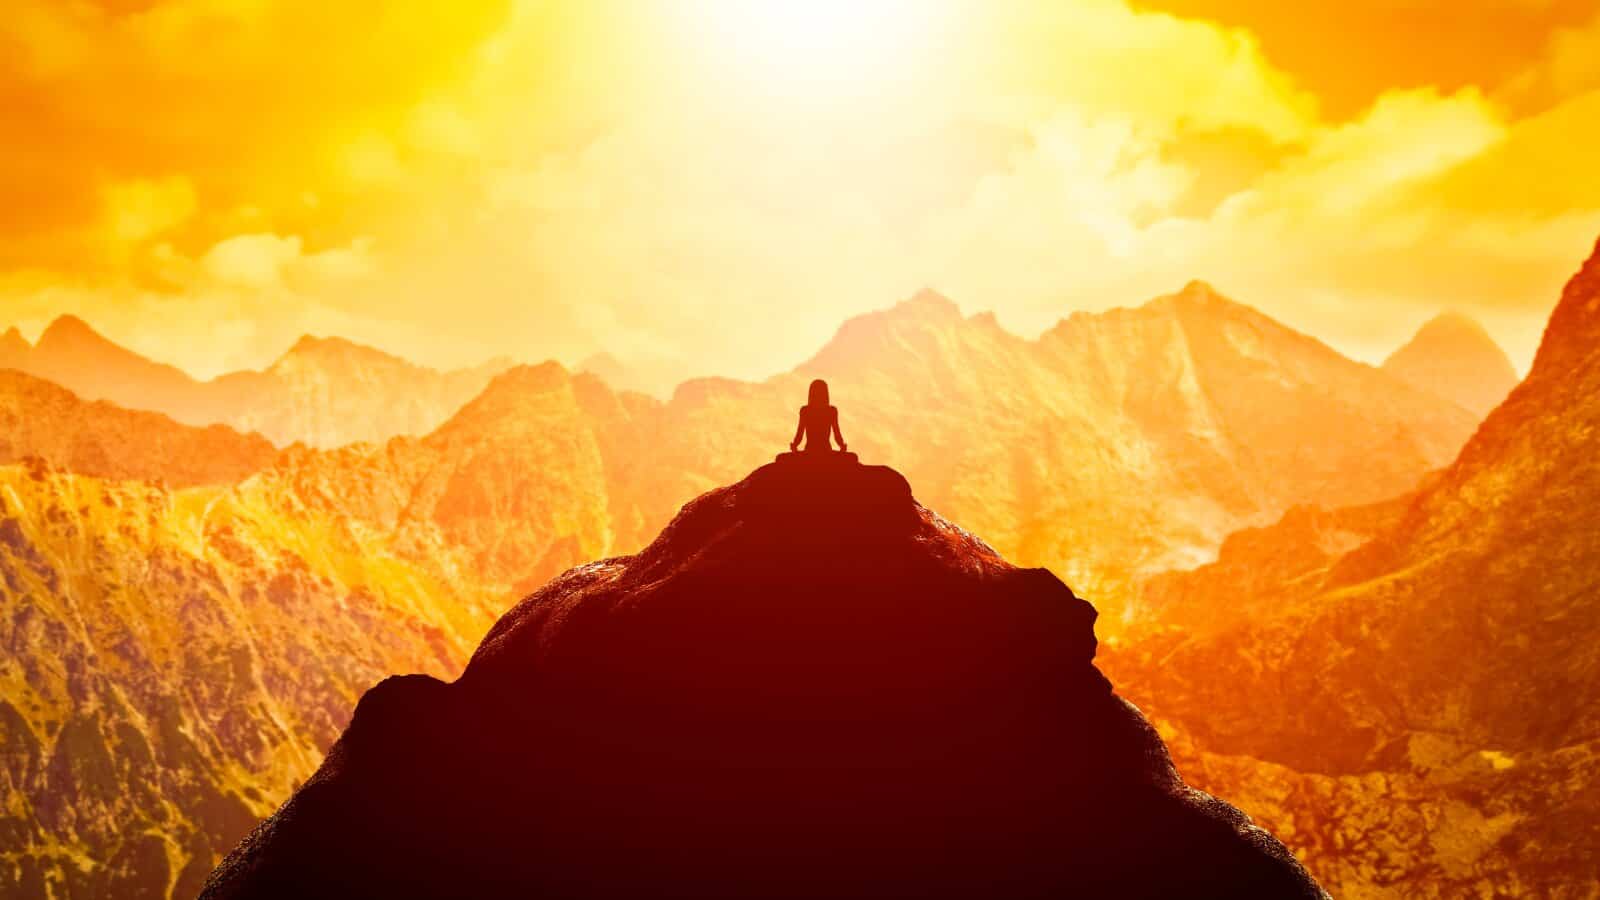 meditating silhouette on top of mountain with sun backdrop